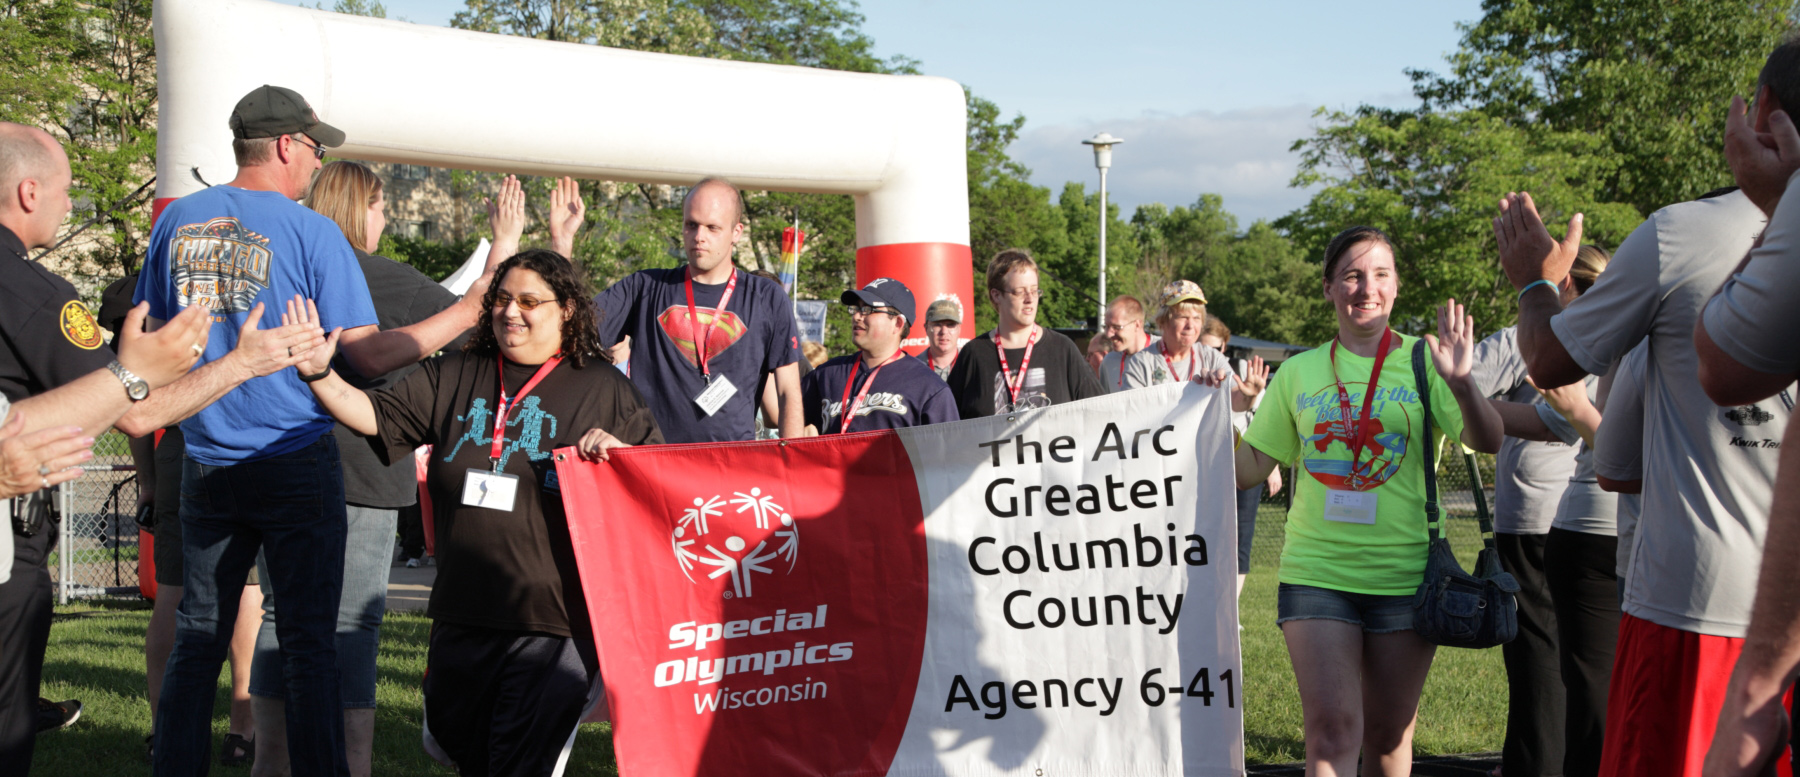 Special Olympic participants getting high fives from crowd as they walk with banner